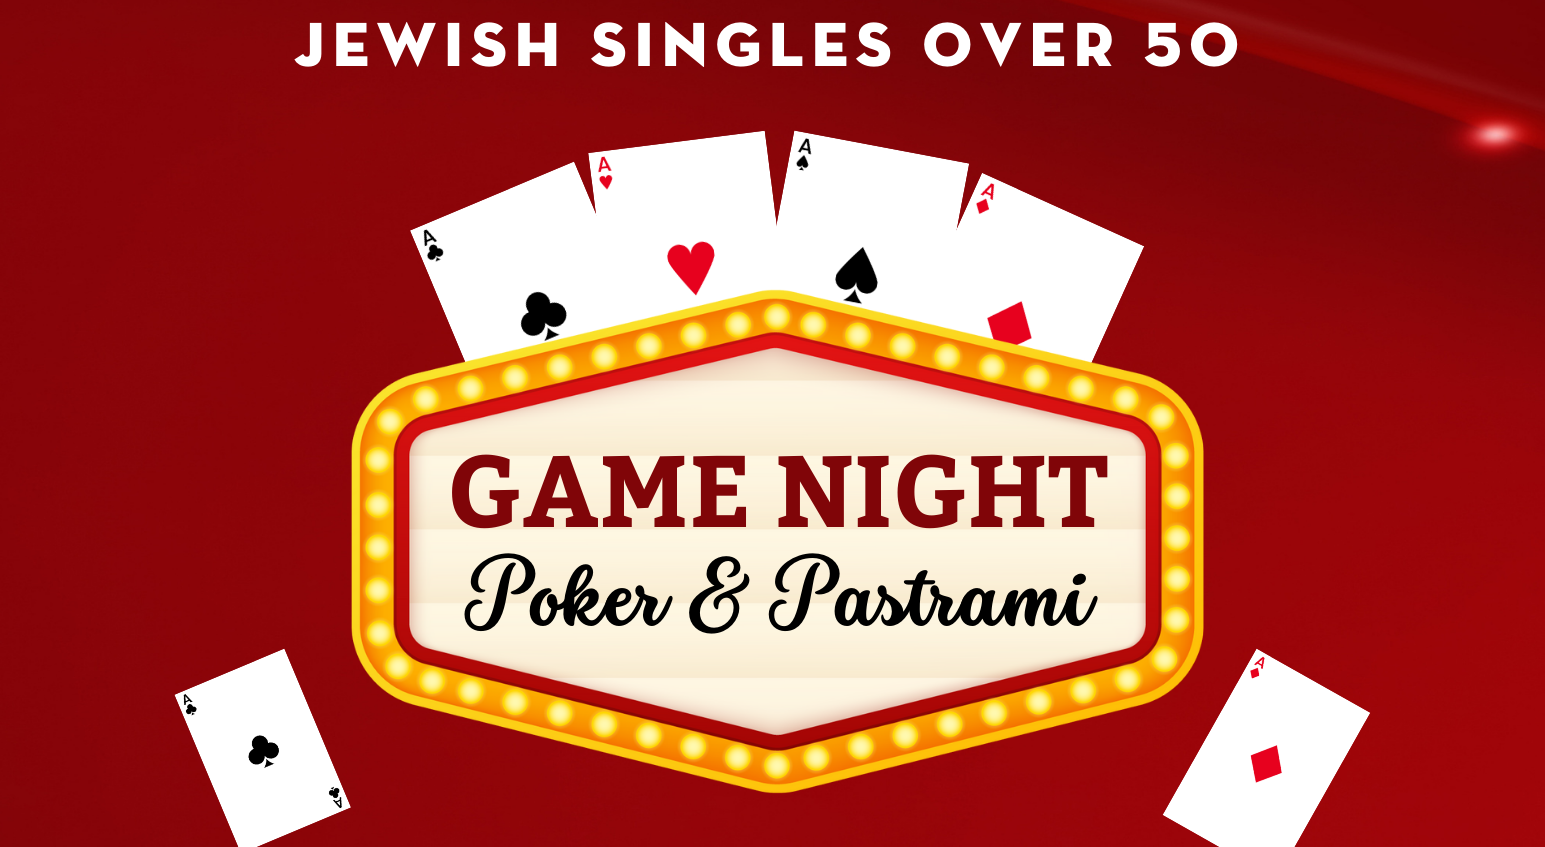 Better Together Jewish Singles Over 50 Game Night: Poker & Pastrami - Sunday, June 4, 5pm